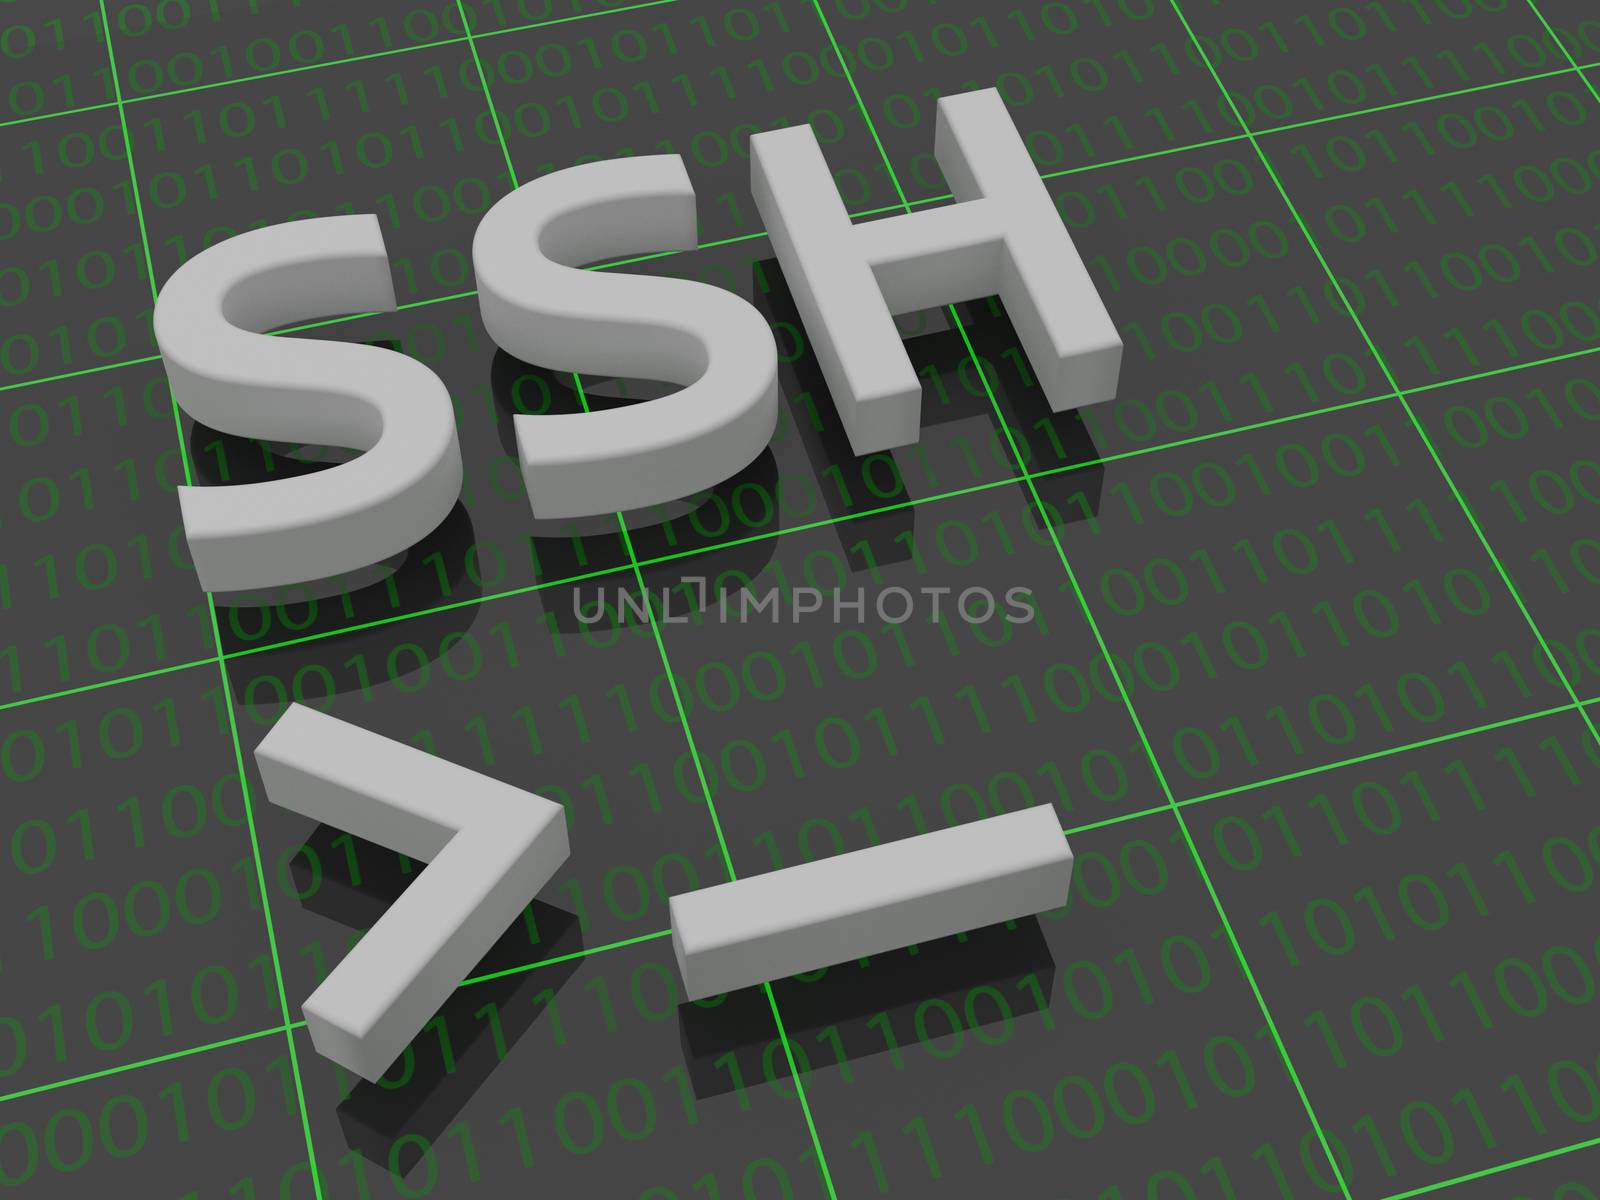 SSH - Secure Shell. The letters SSH and a cursor projected above a binairy floor filled with 1 and 0.